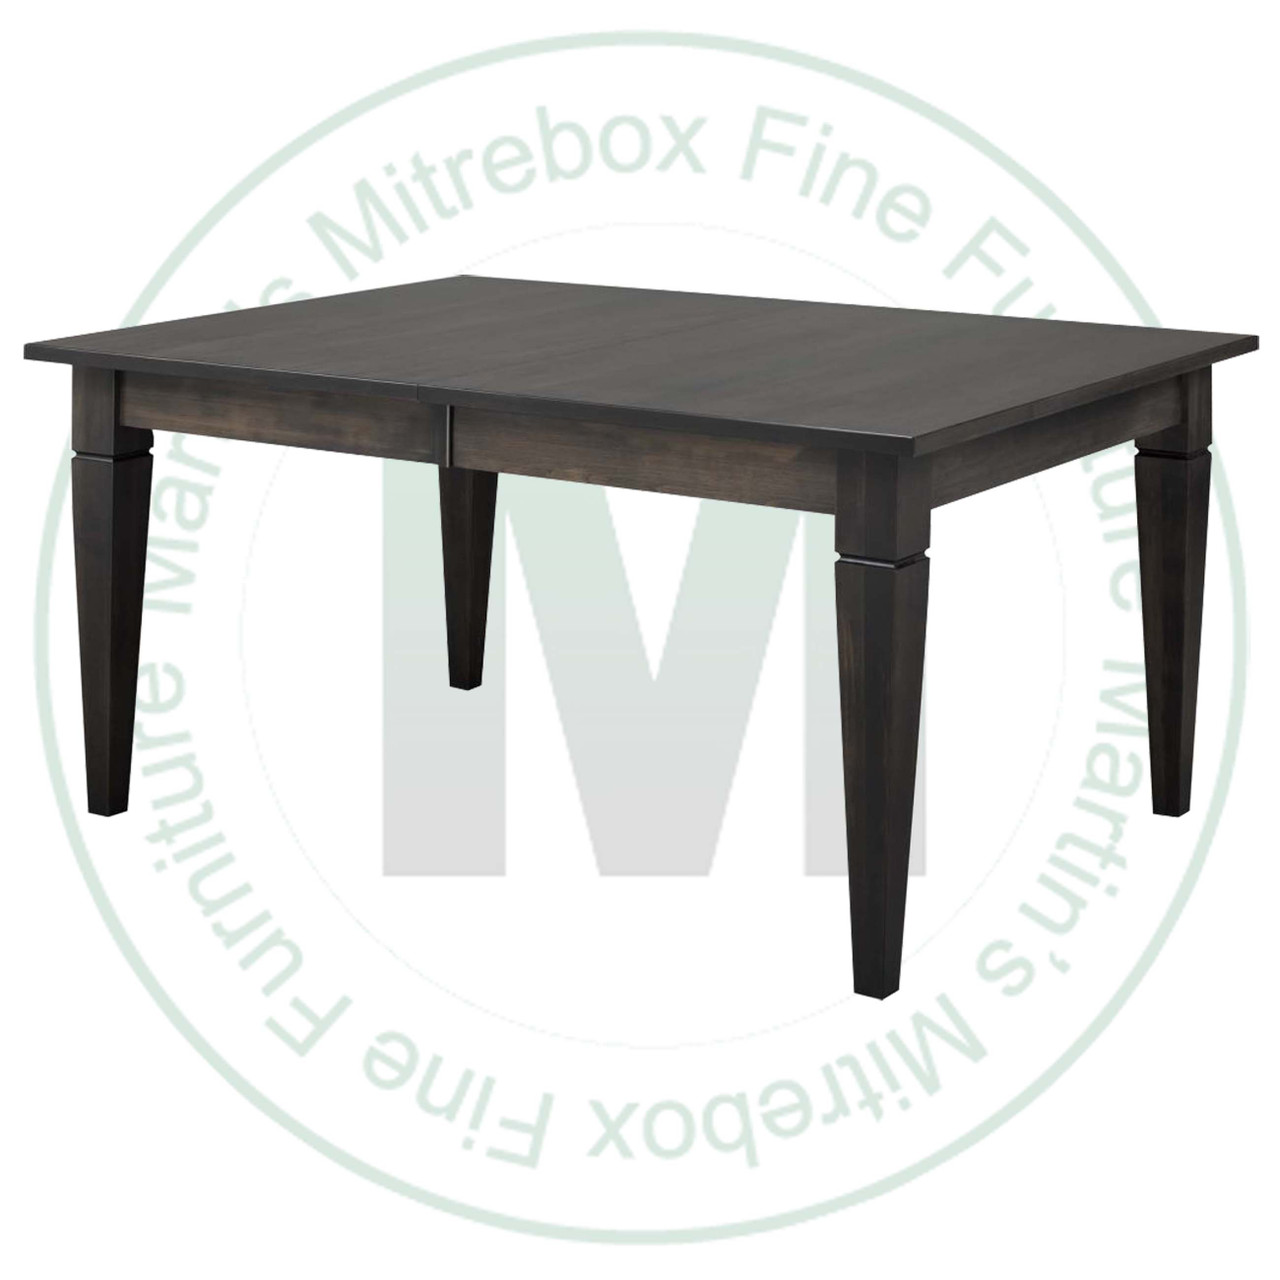 Wormy Maple Reesor Solid Top Harvest Table 36''D x 36''W x 30''H Table Has 1'' Thick Top And 2 - 16'' Extensions